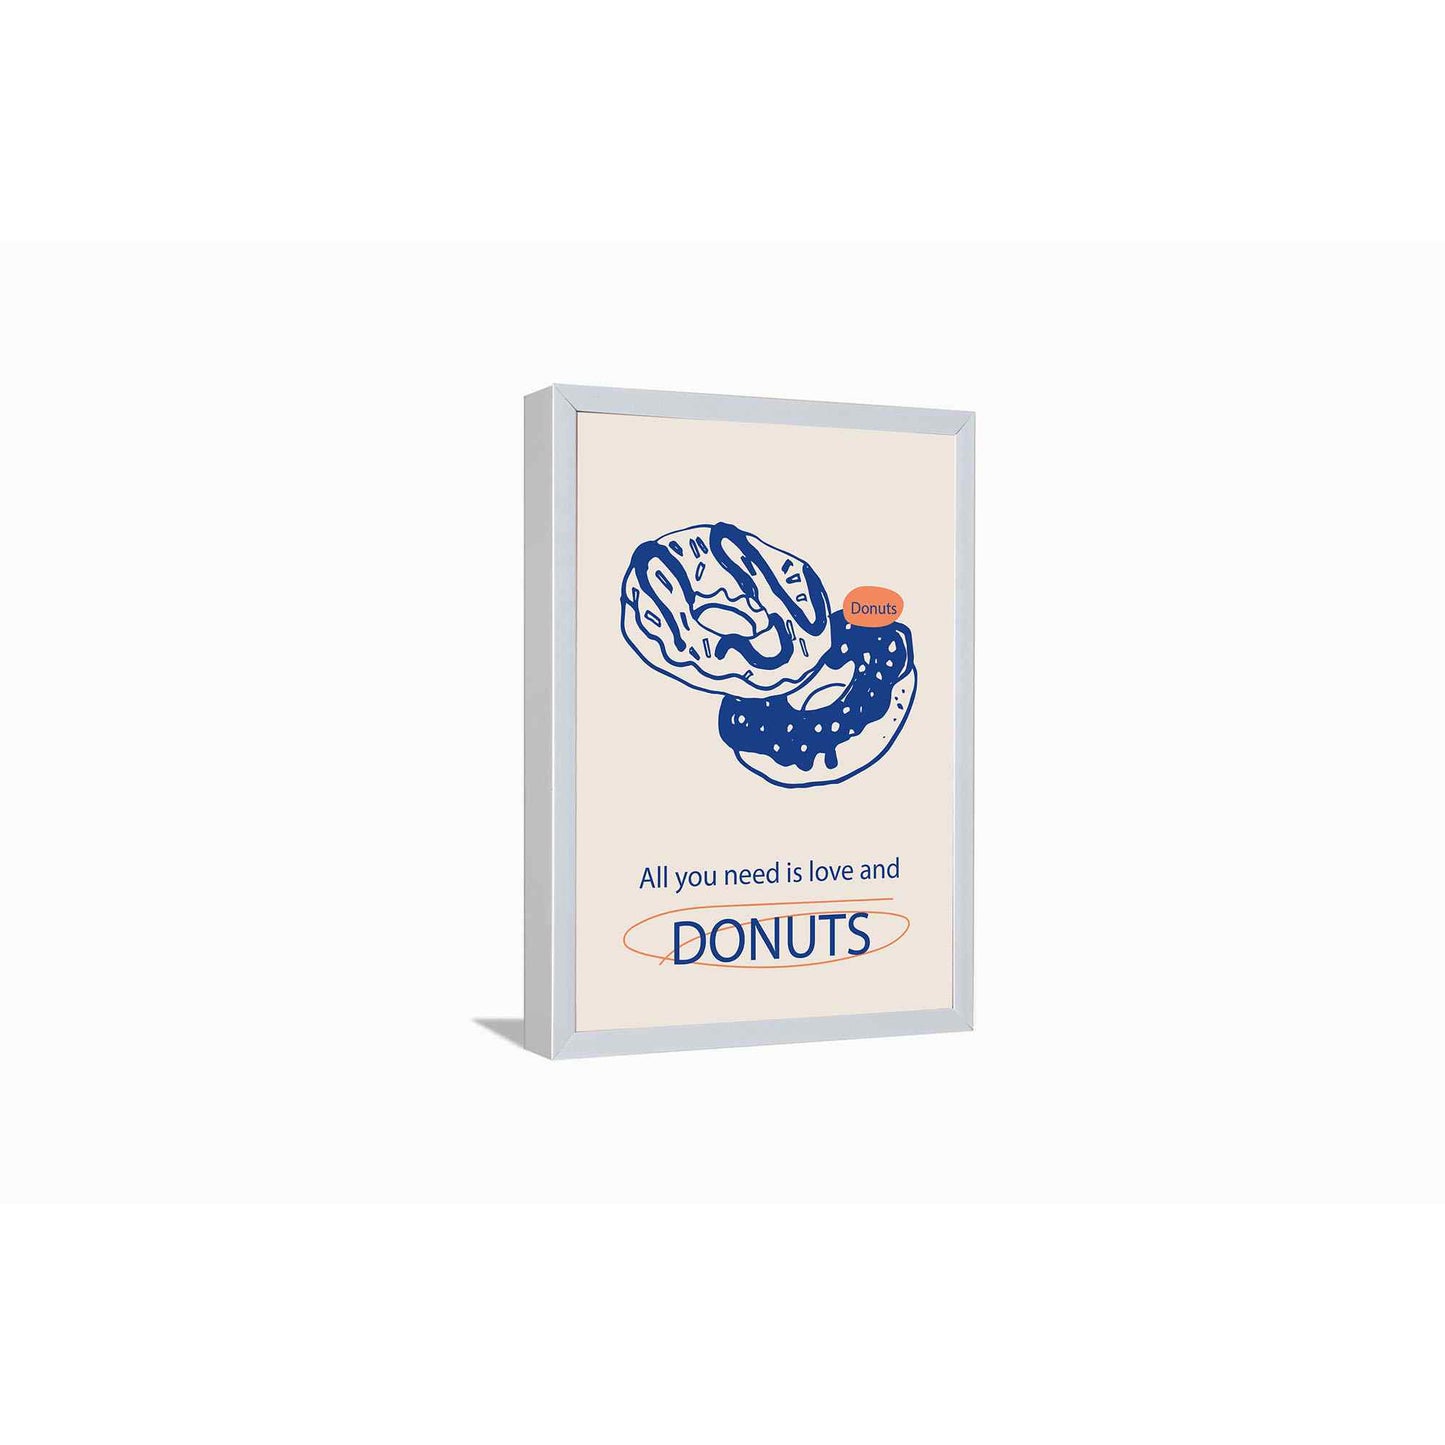 Donuts---